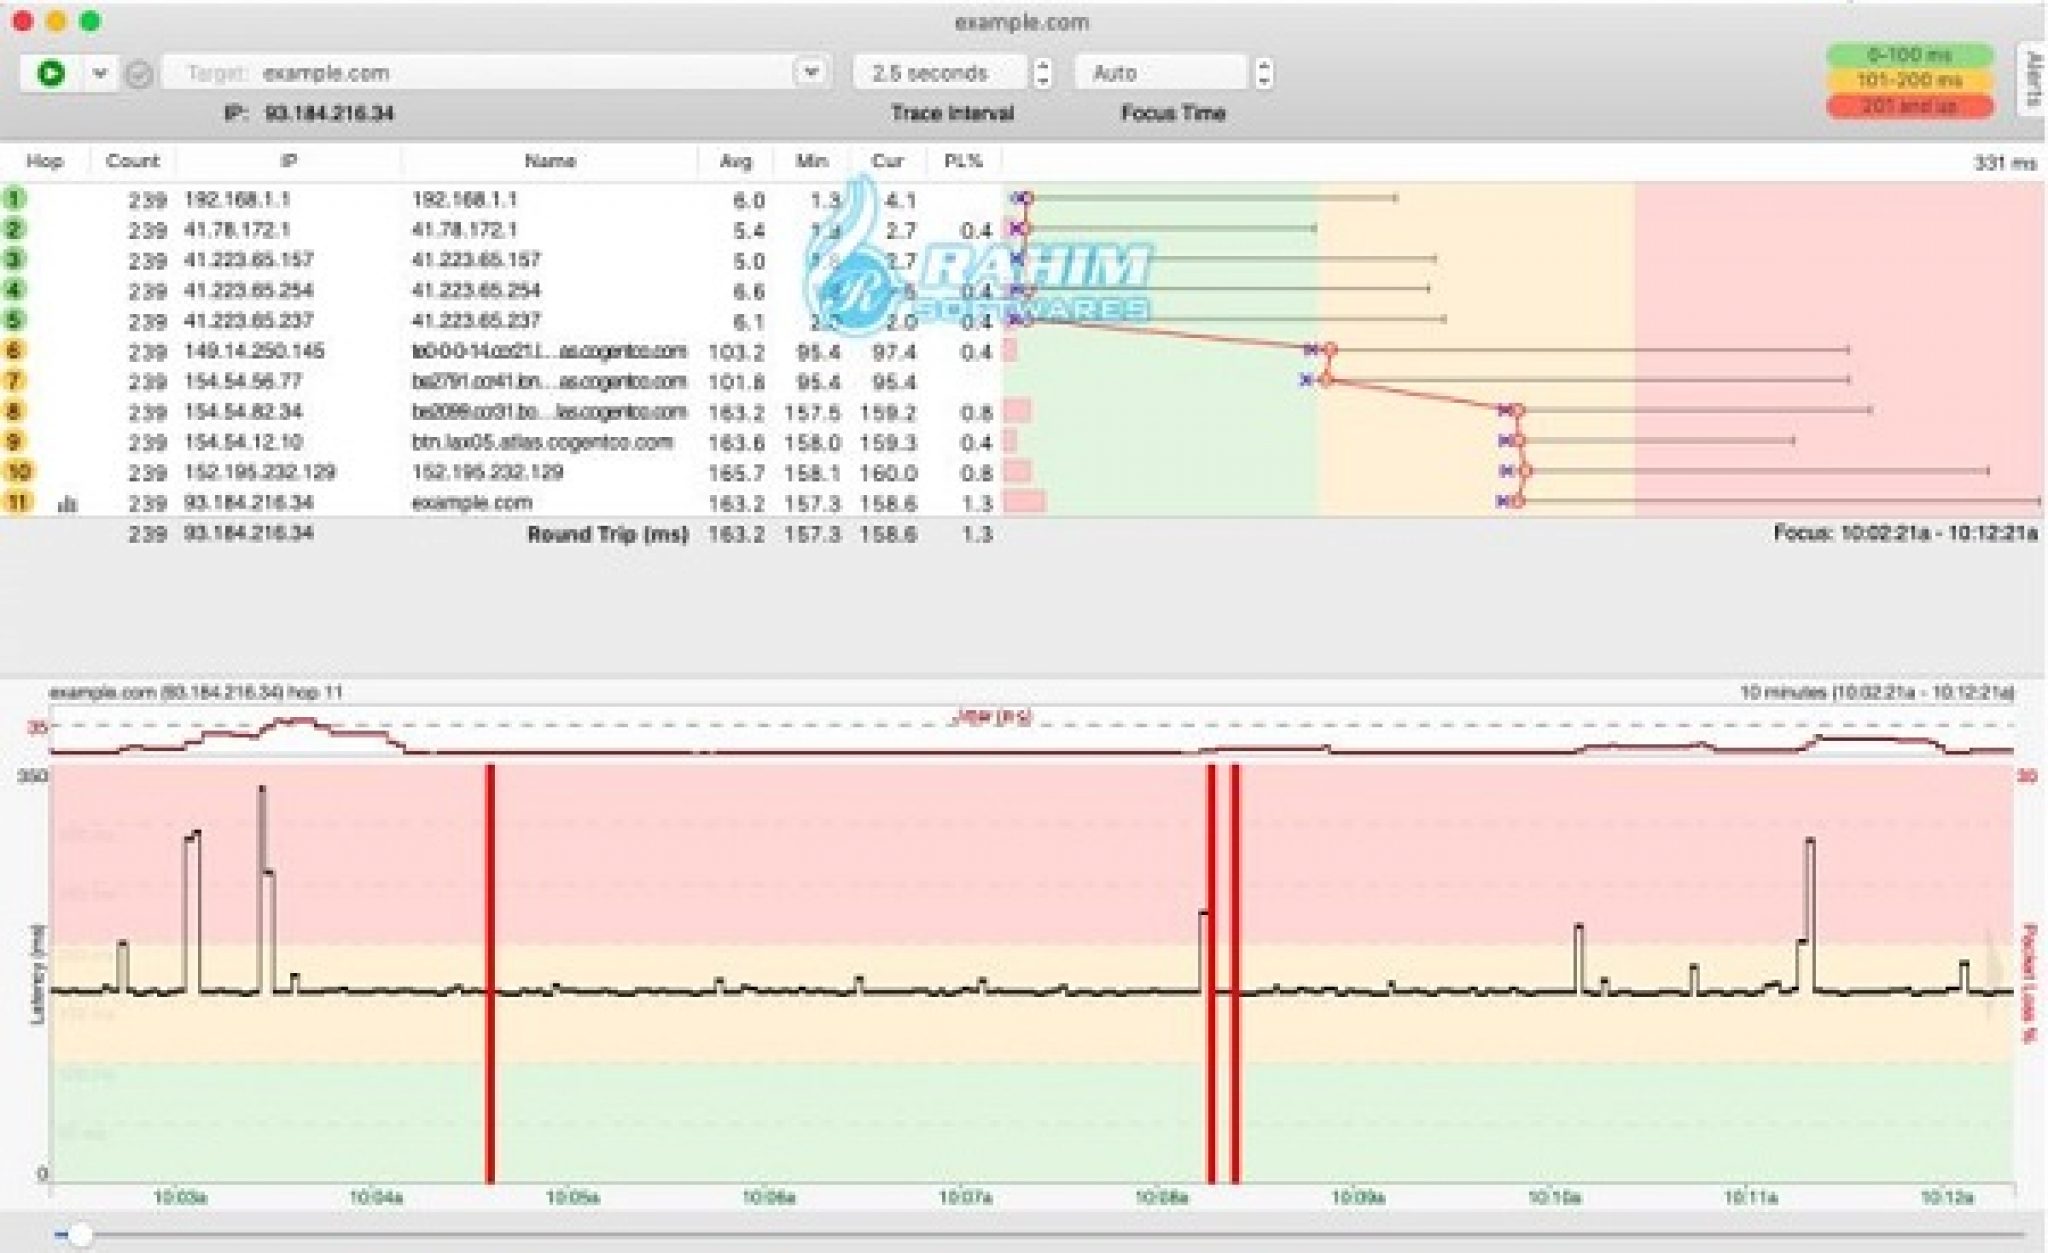 pingplotter for download speed